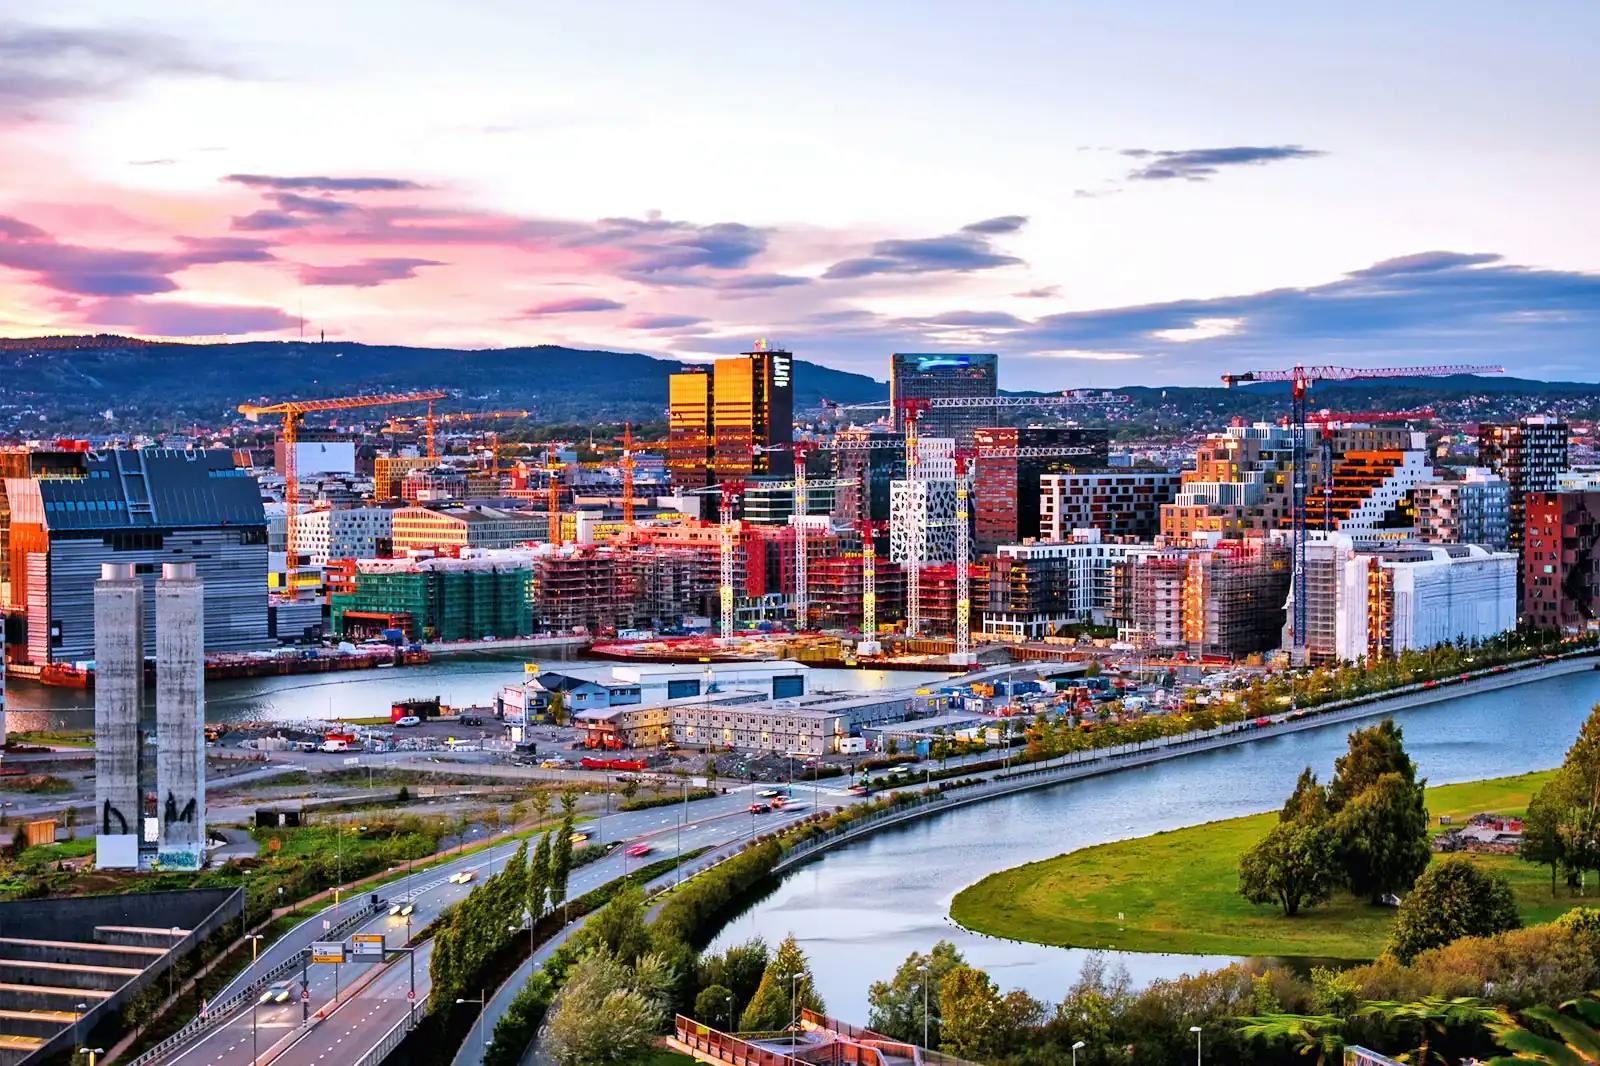 Overview of Oslo city center in the sunset.